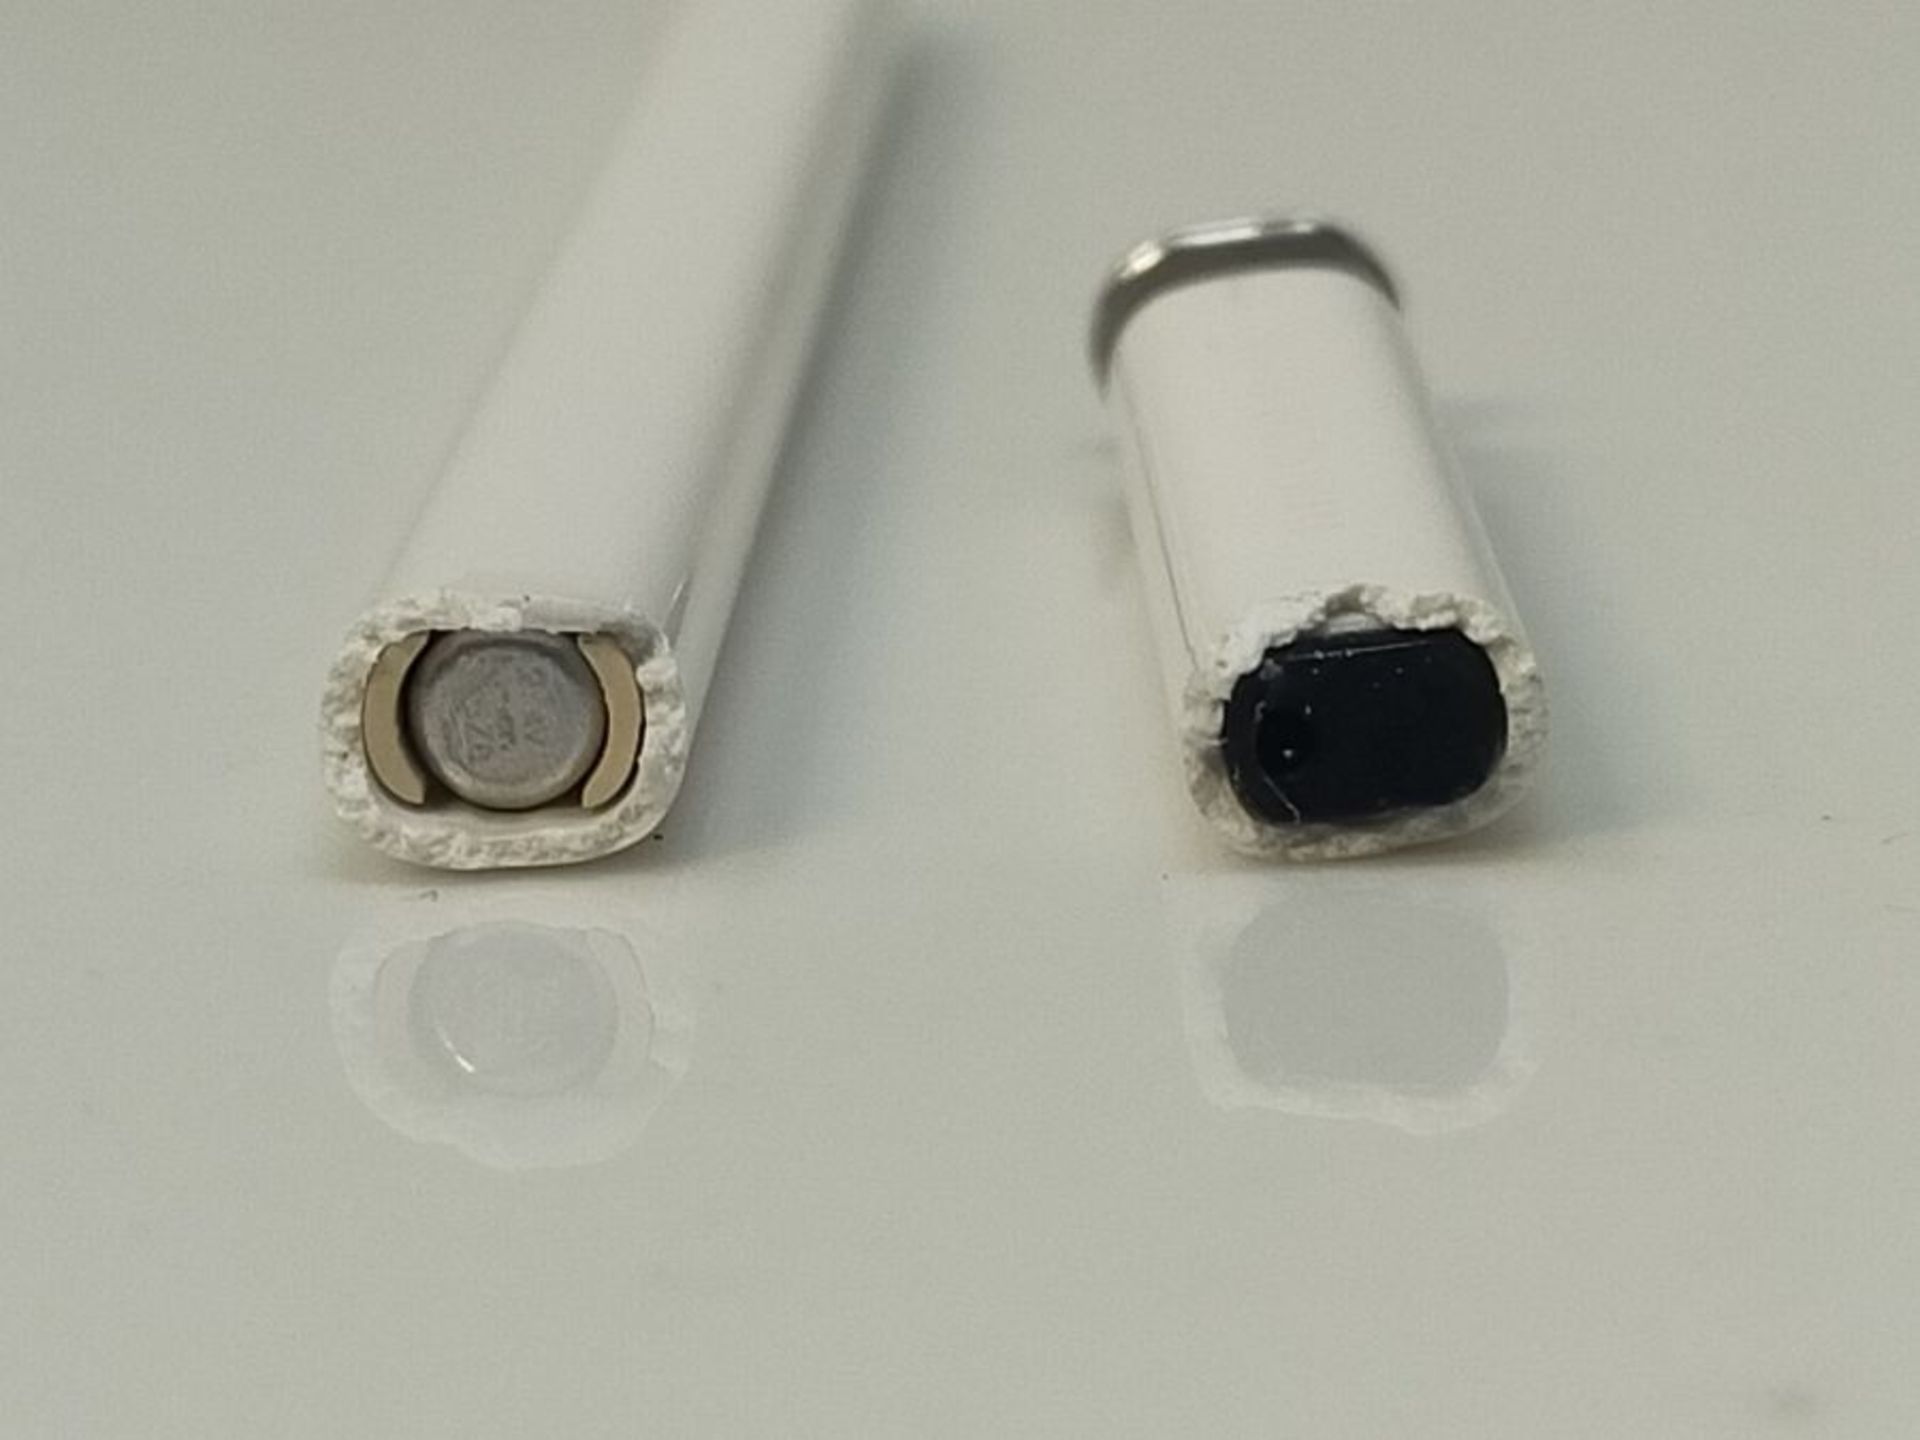 [CRACKED] Samsung Note20 Series S Pen, Mystic White - Image 3 of 3